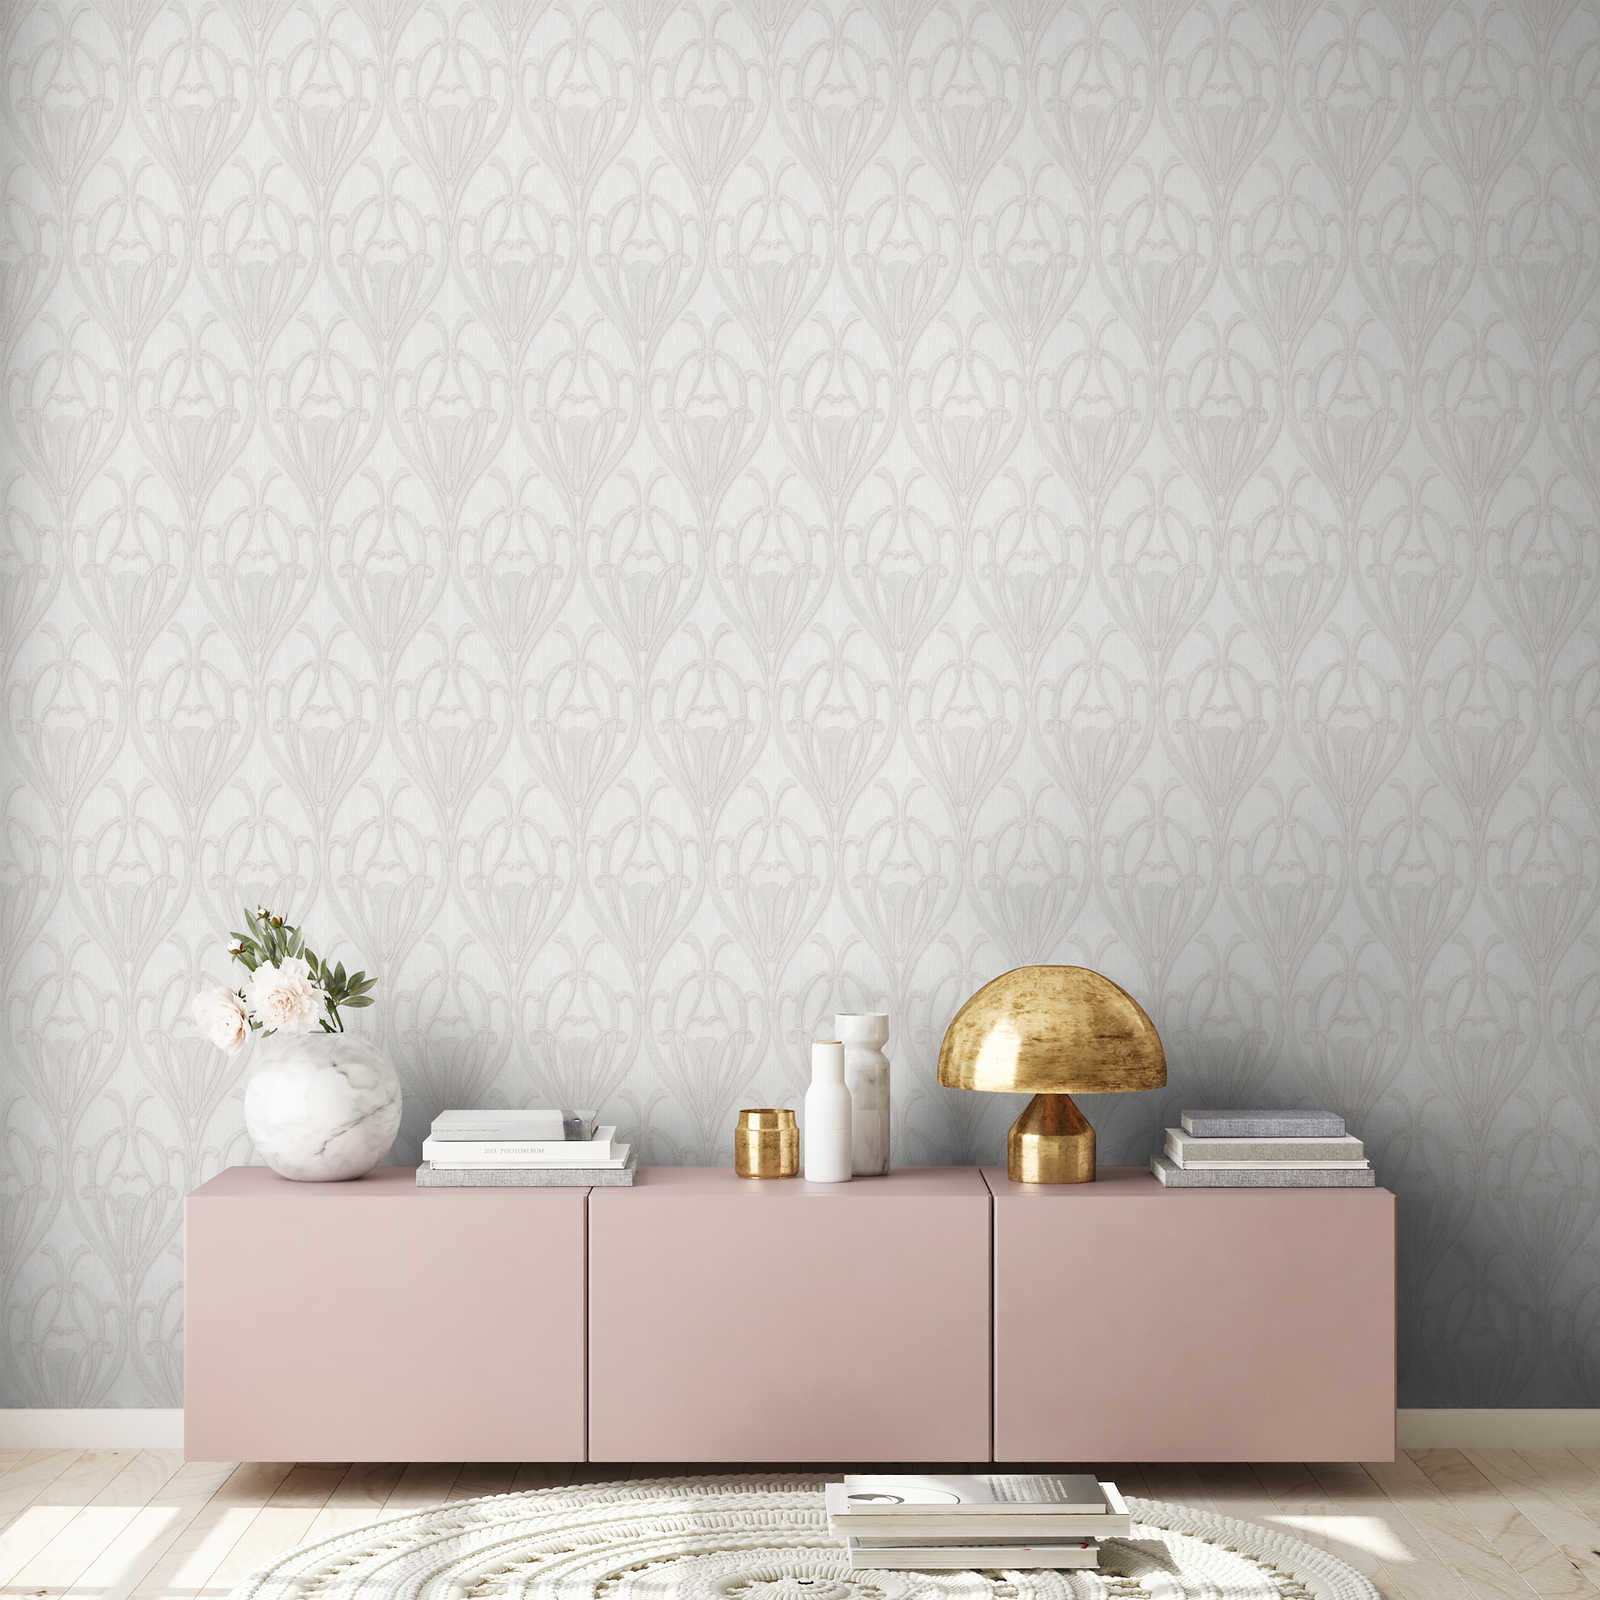             Art Deco wallpaper with ornament pattern & textile look
        